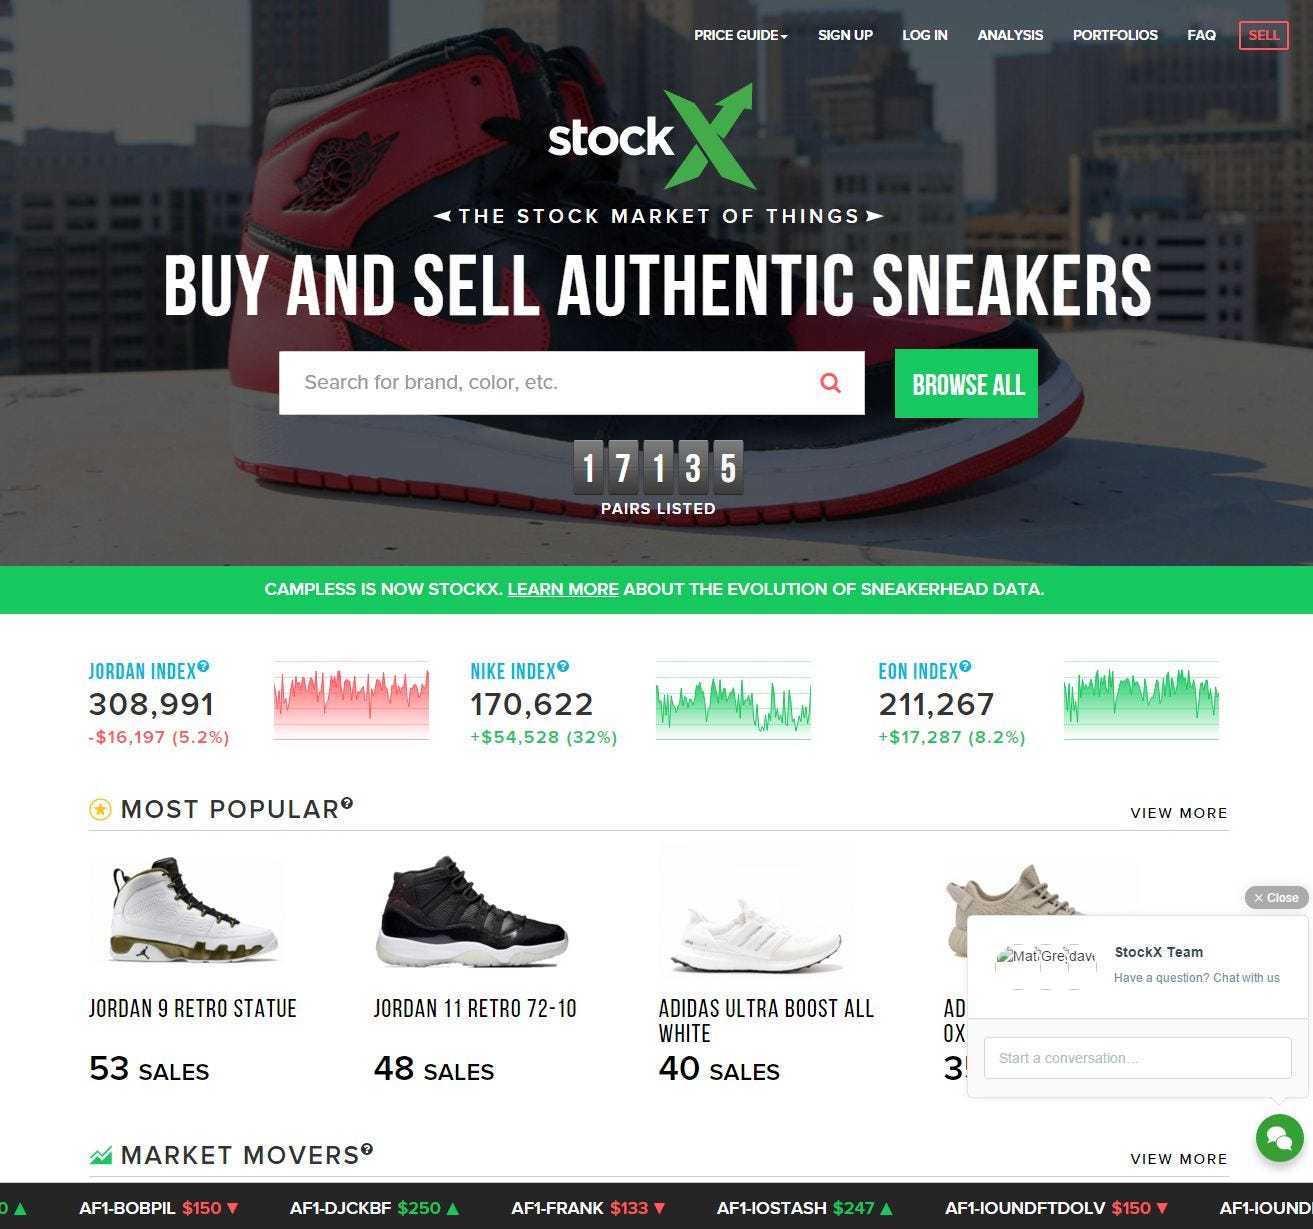 campless stockx